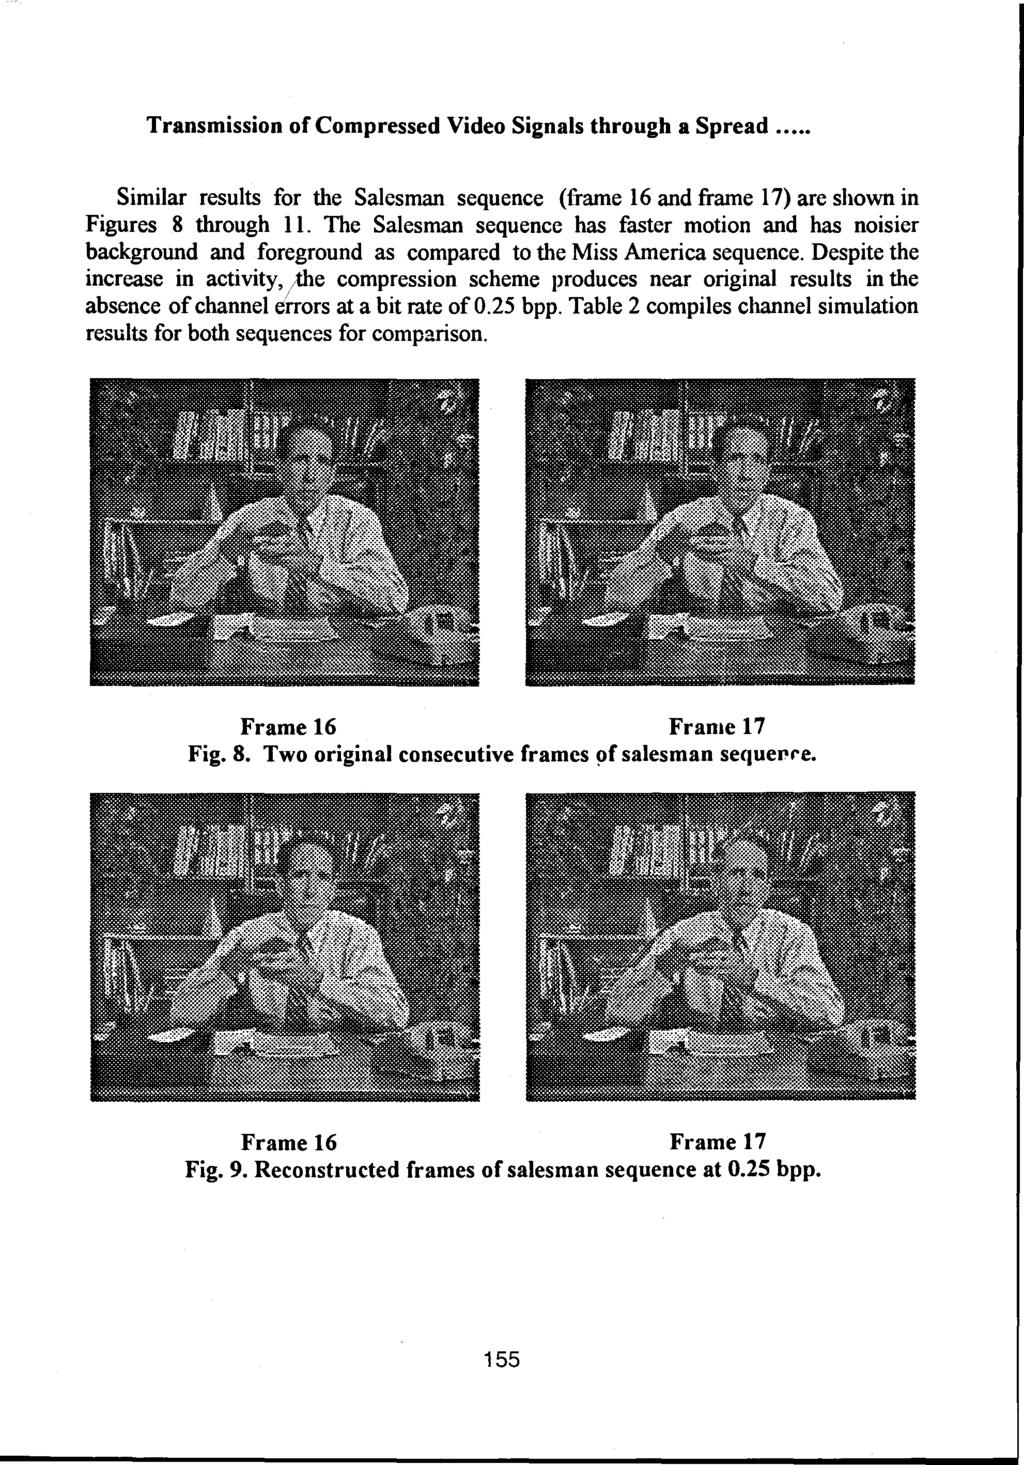 Transmission of Compressed Video Signals through a Spread... Similar results for the Salesman sequence (frame 16 and frame 17) are shown in Figures 8 through 11.